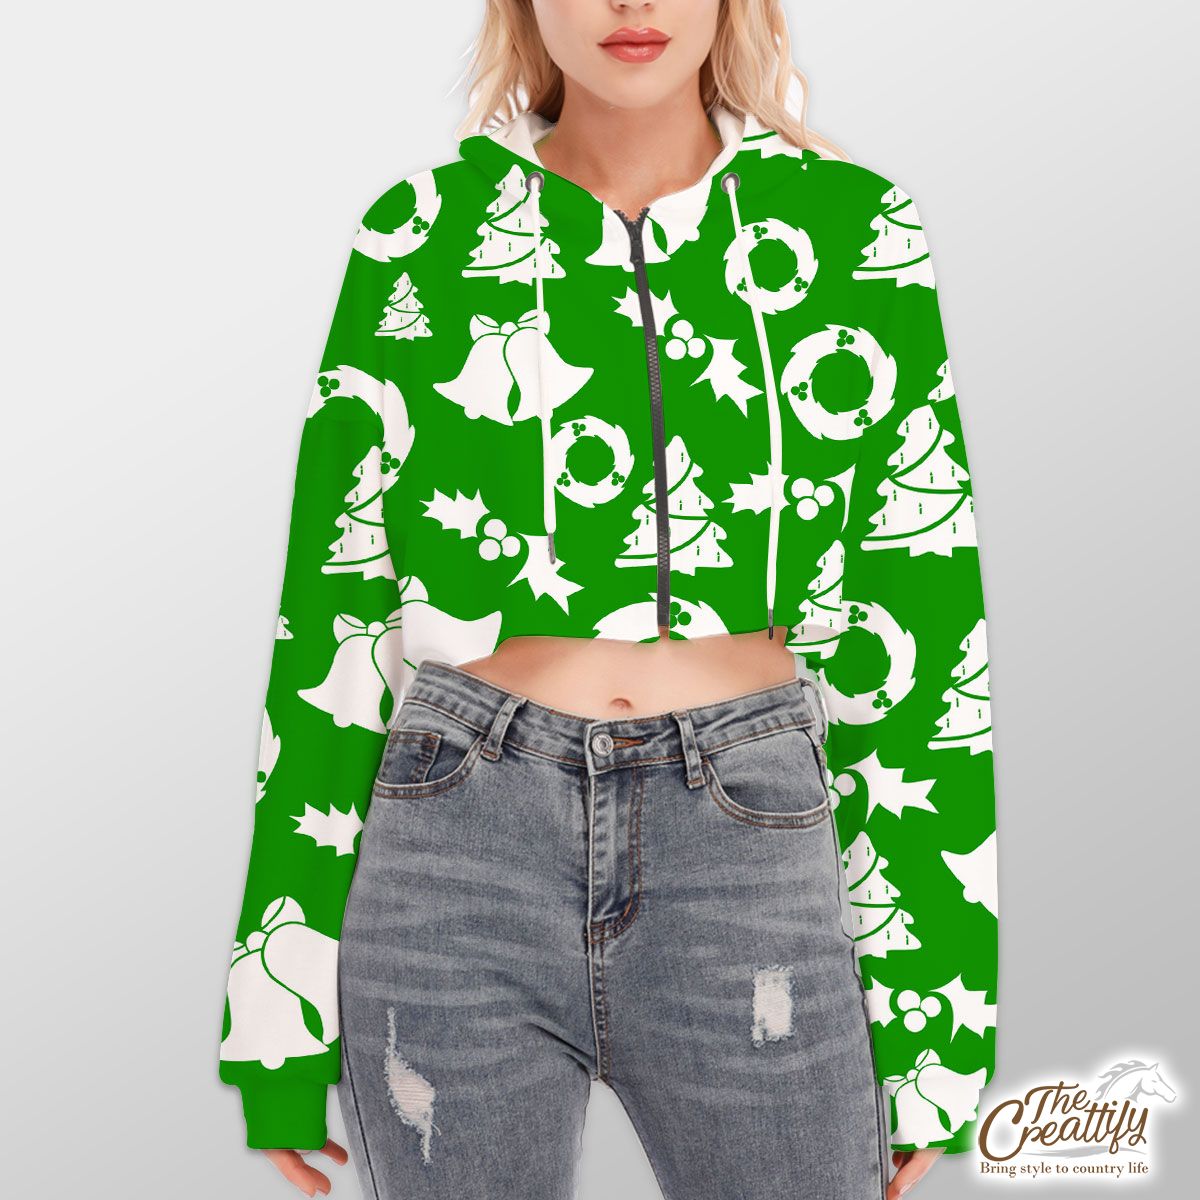 Christmas Wreath, Holly Leaf, Pine Tree And Bells On Green Hoodie With Zipper Closure